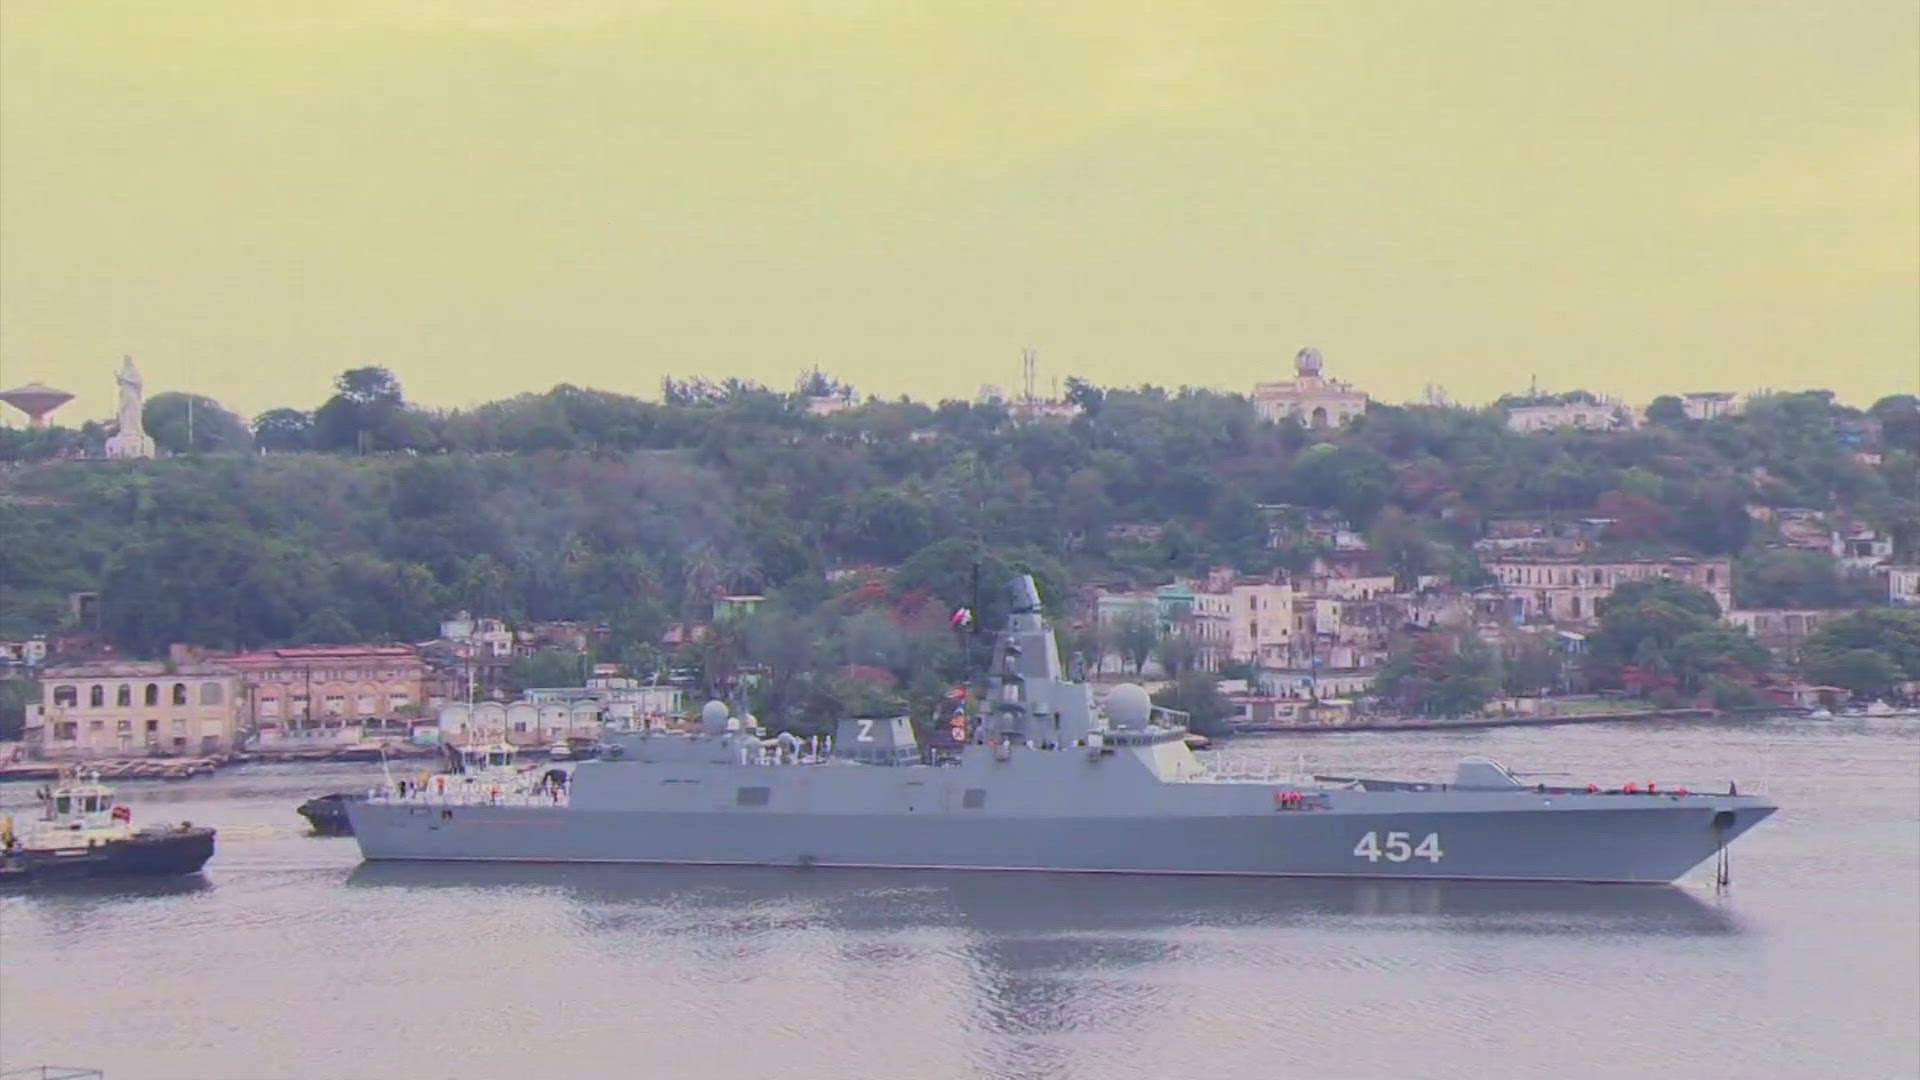 On warships in Cuba, Russia says West is deaf to Moscow&#39;s diplomatic signals